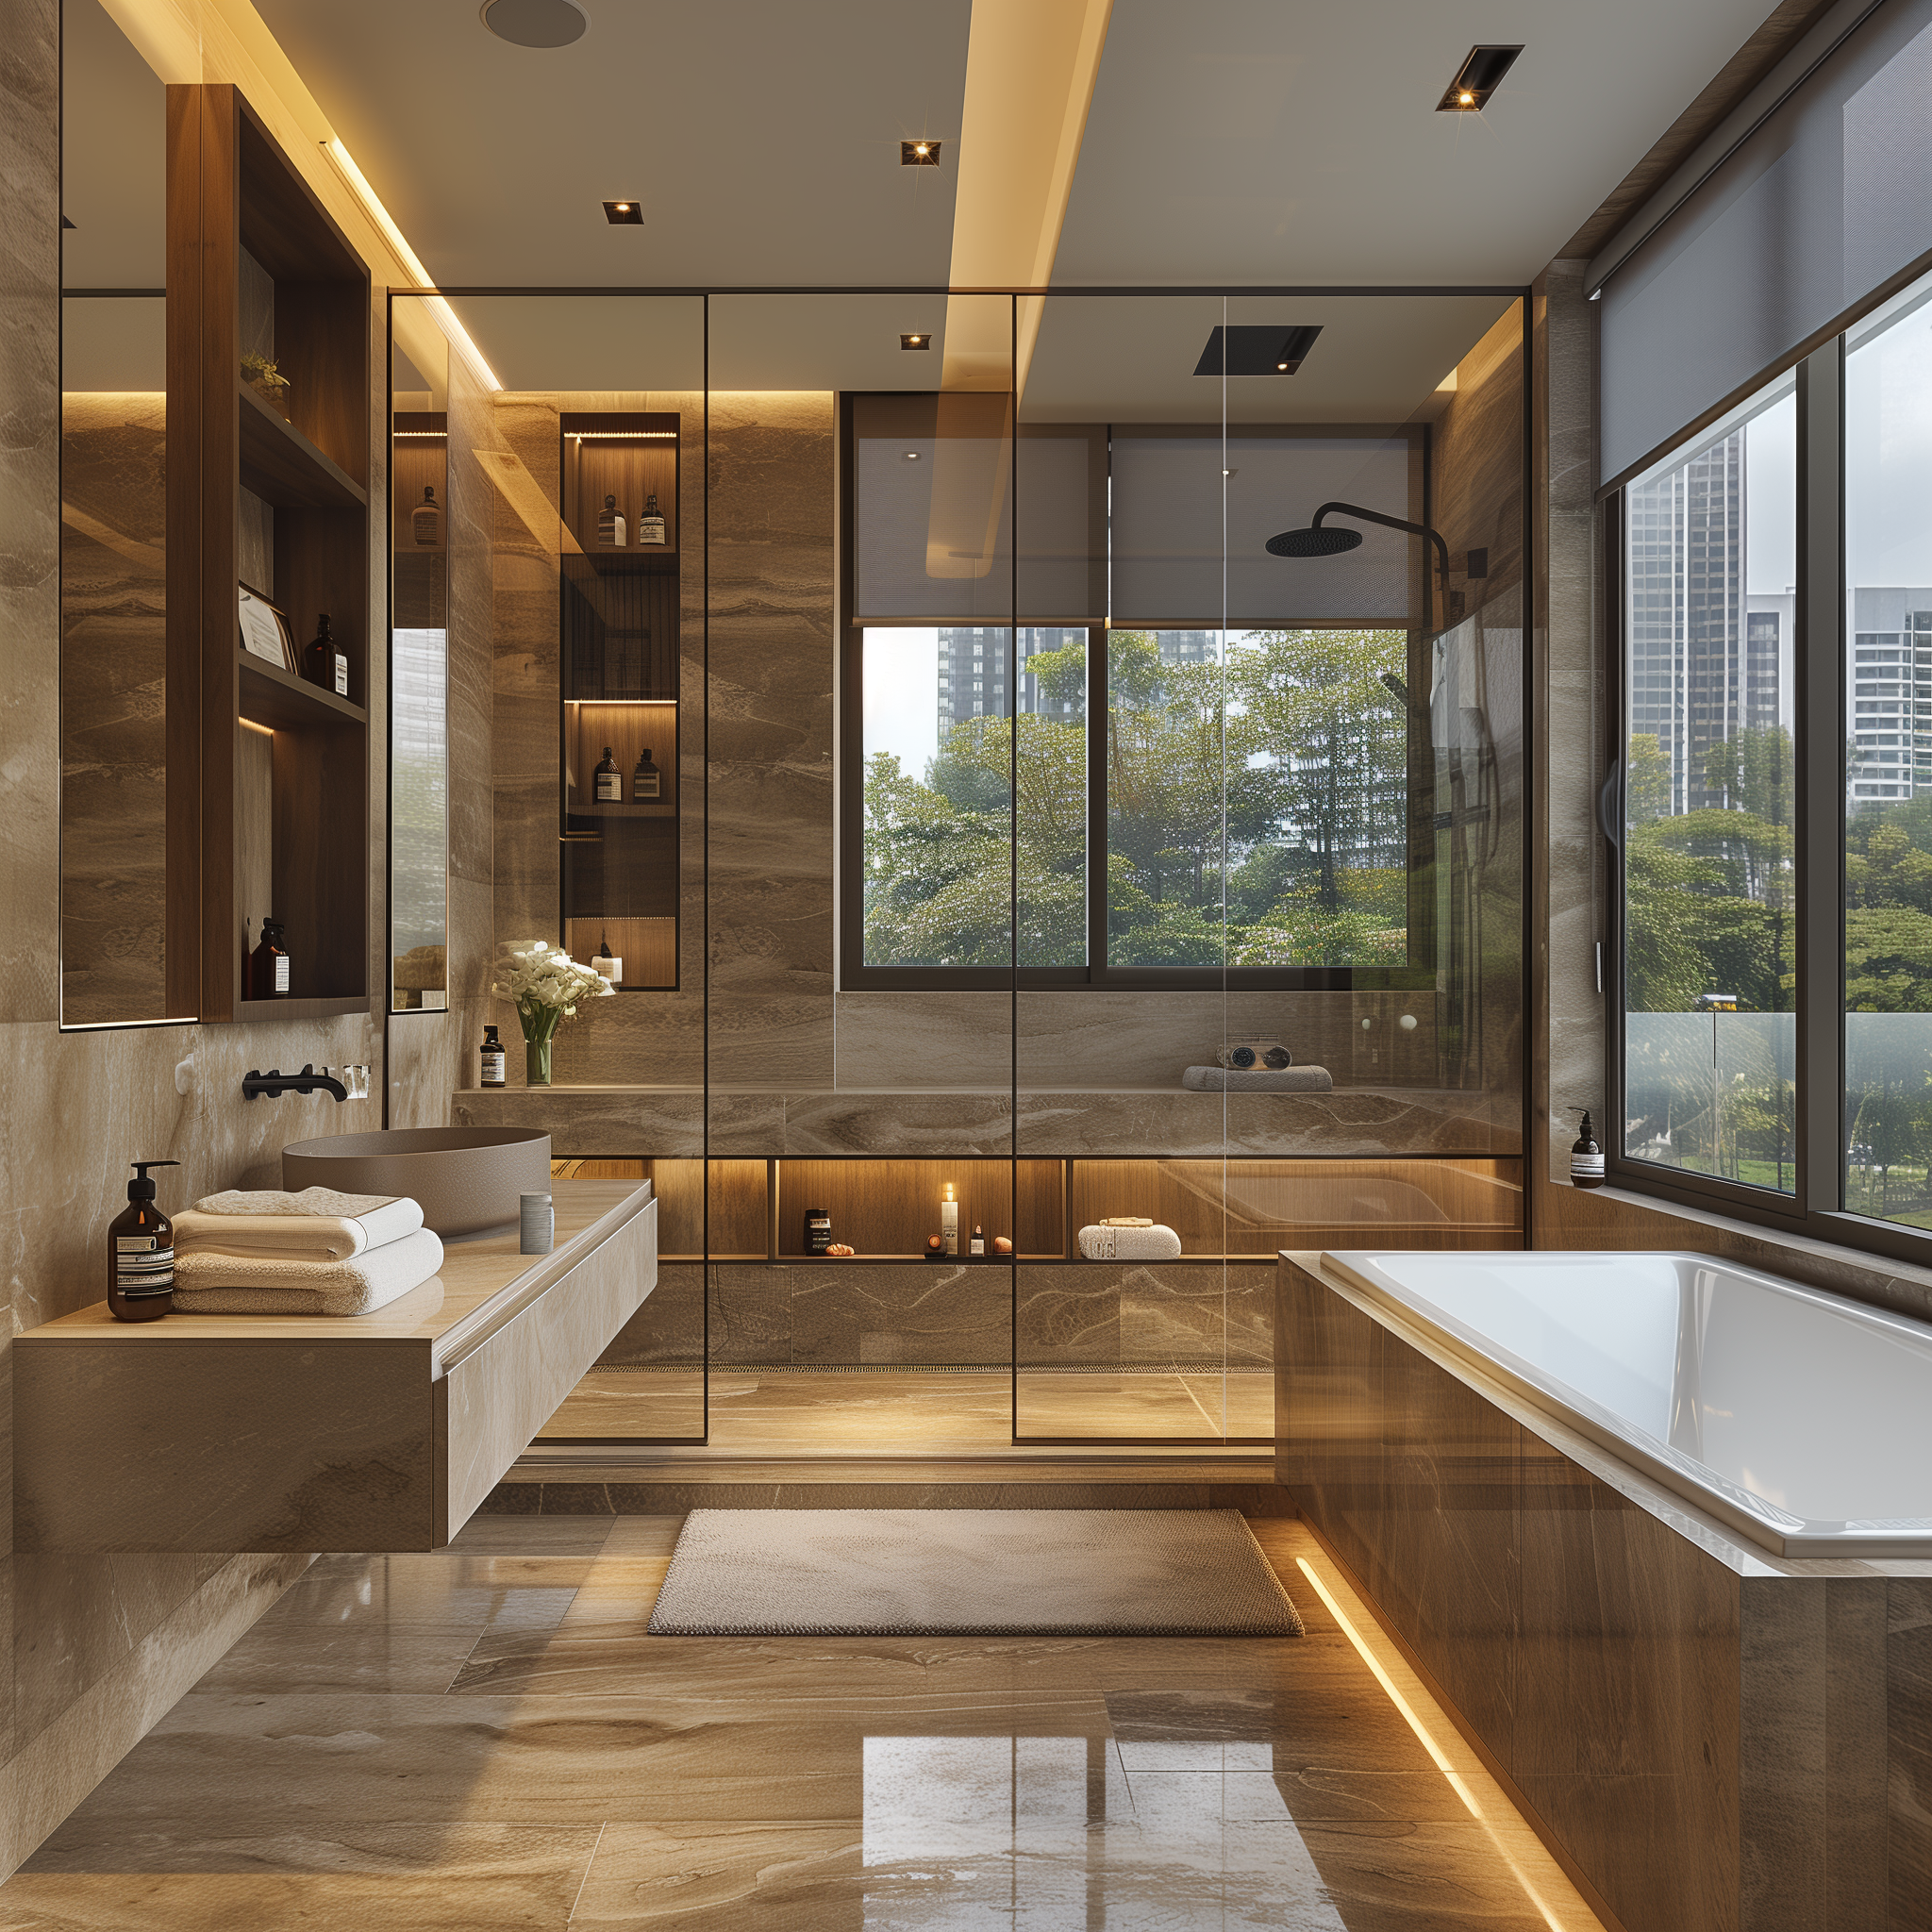 Luxury modern bathroom with large glass windows, a freestanding bathtub, and marble walls with ambient lighting.